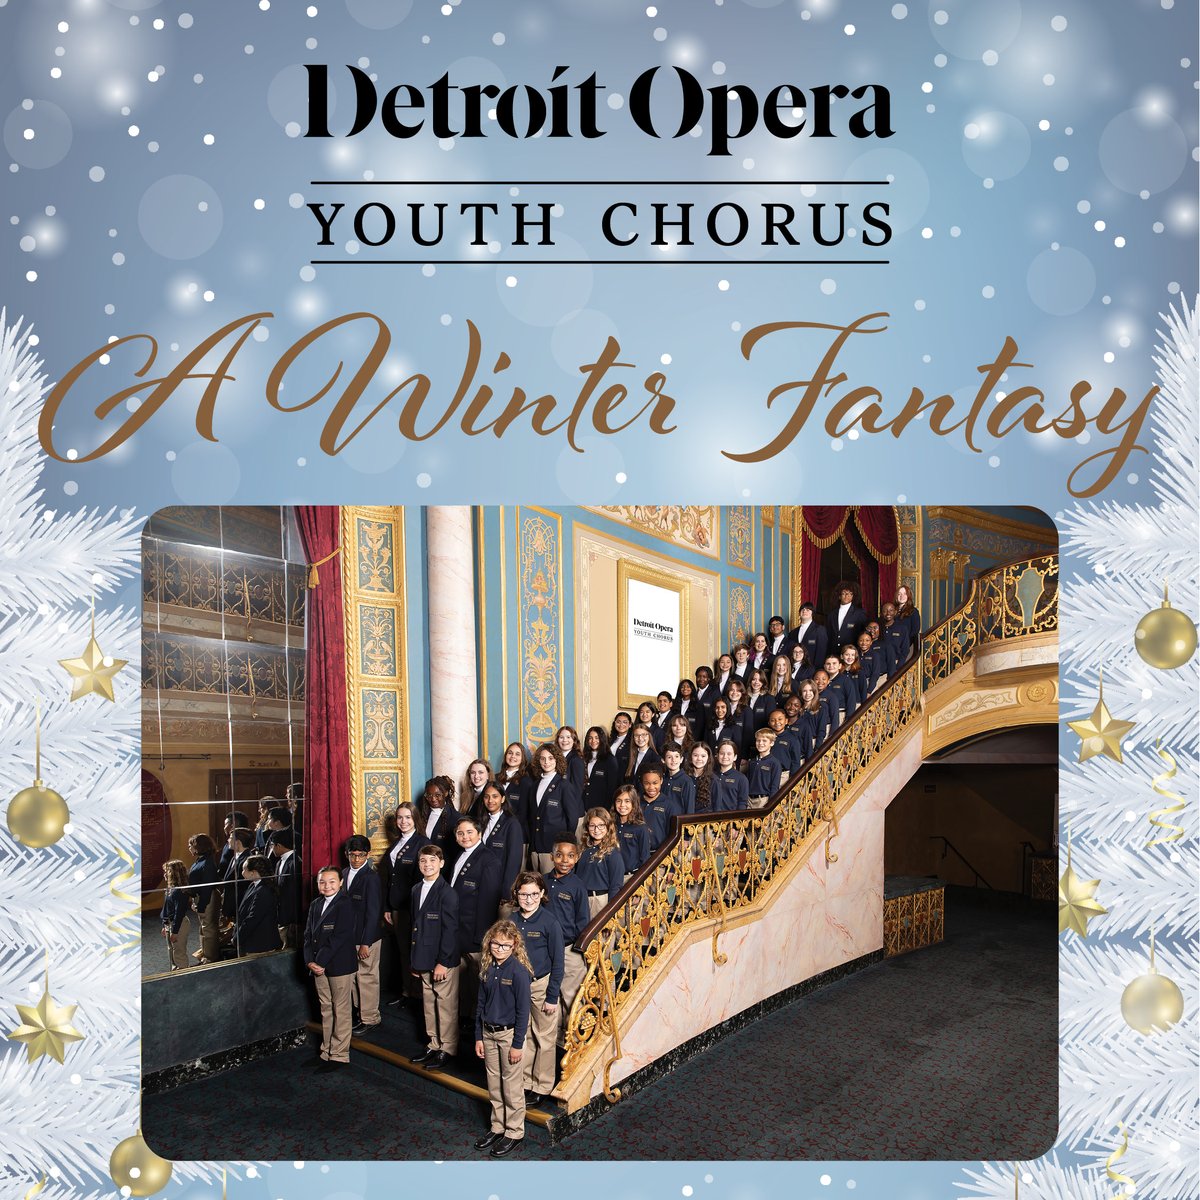 This Sunday, enjoy holiday music by our very own Detroit Opera Youth Chorus! The concert is 2pm at First Presbyterian Church of Royal Oak. Tickets are available at bit.ly/DOYCWinter or at the door.